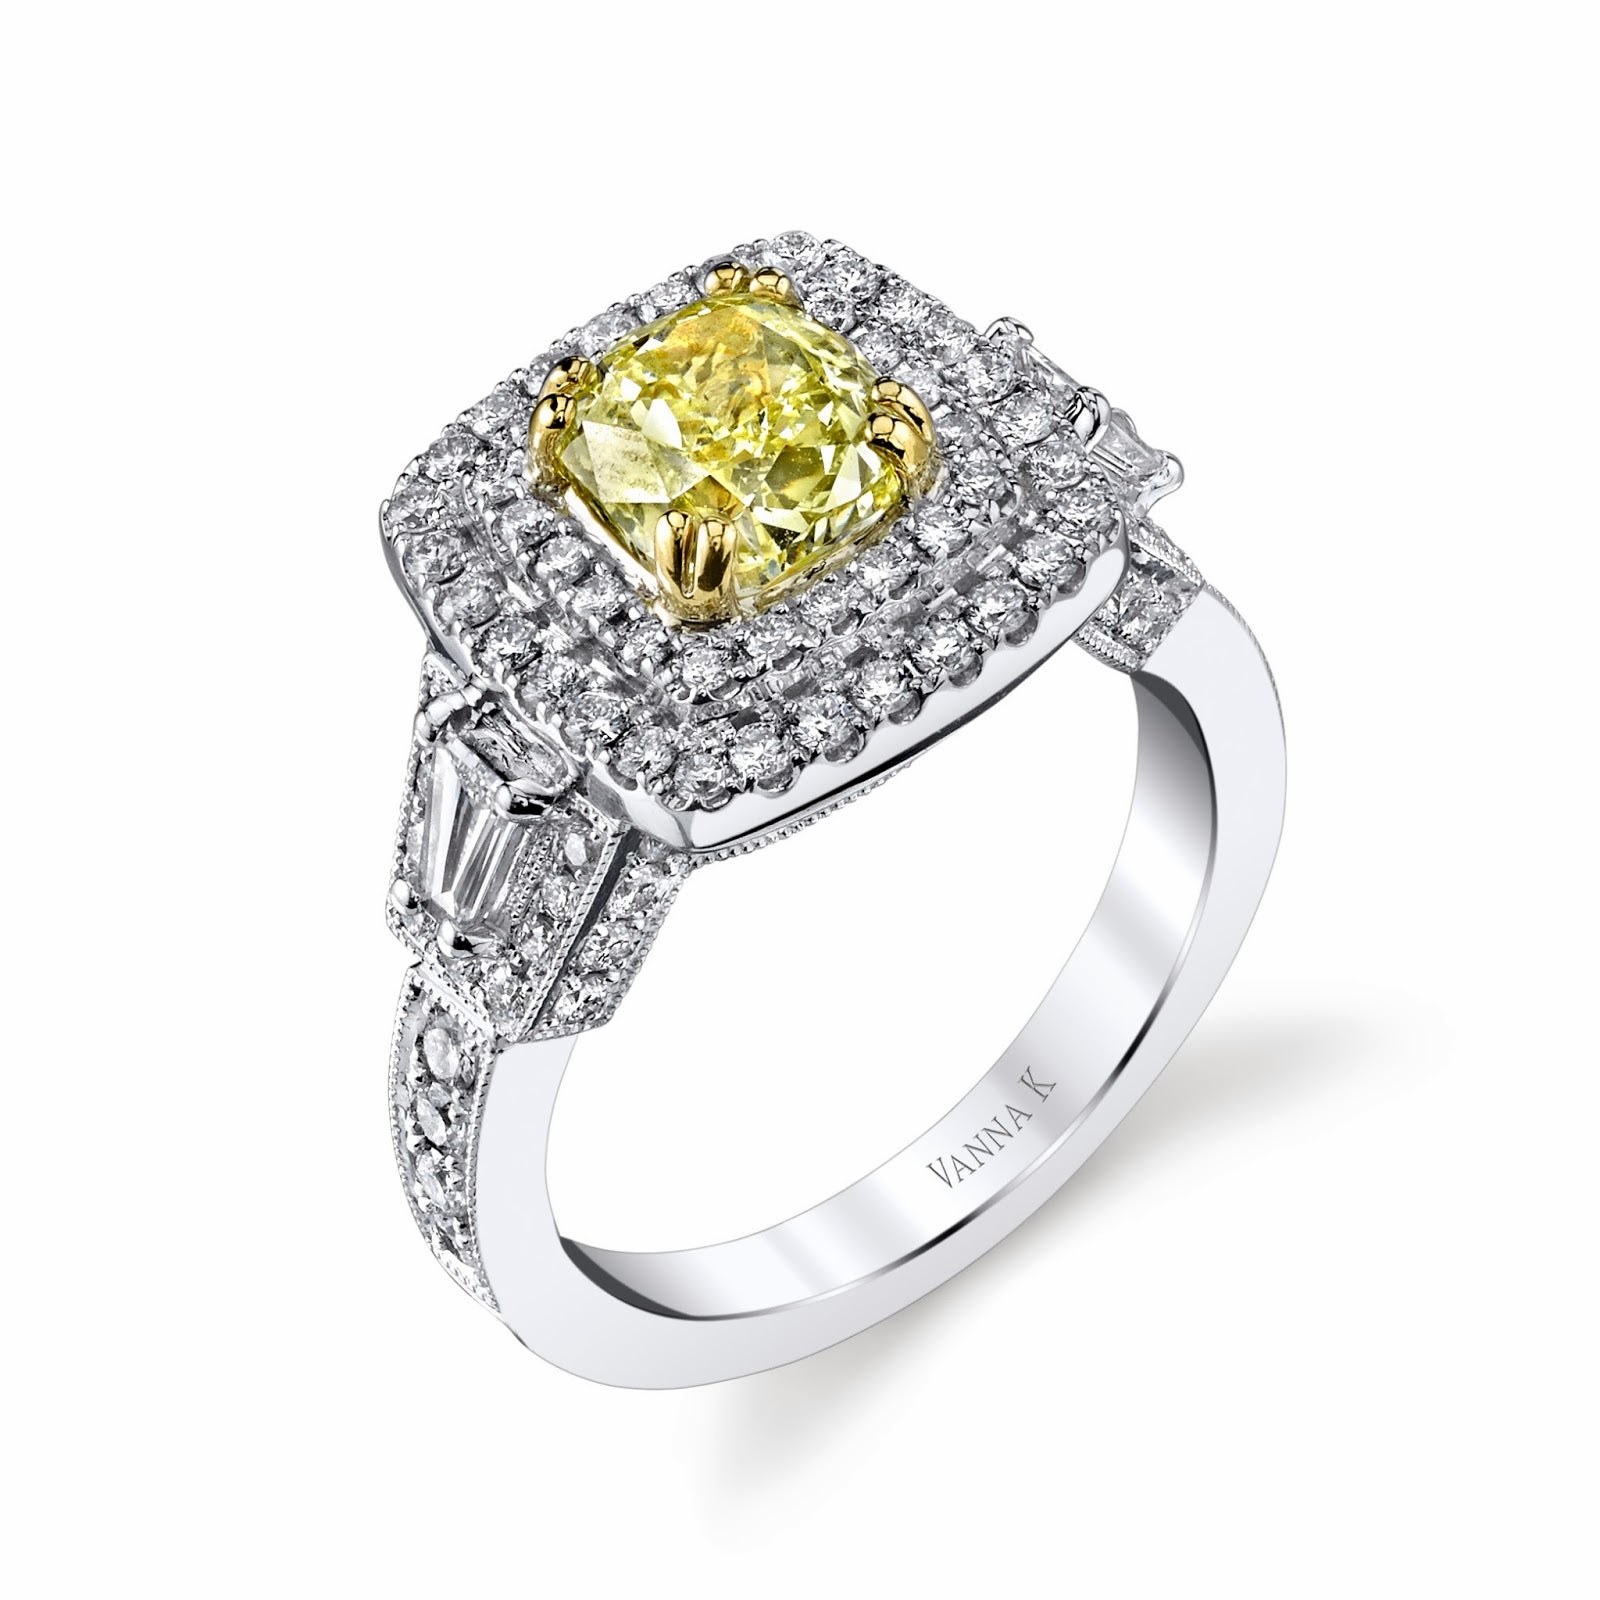 Canary yellow diamonds from this day forward